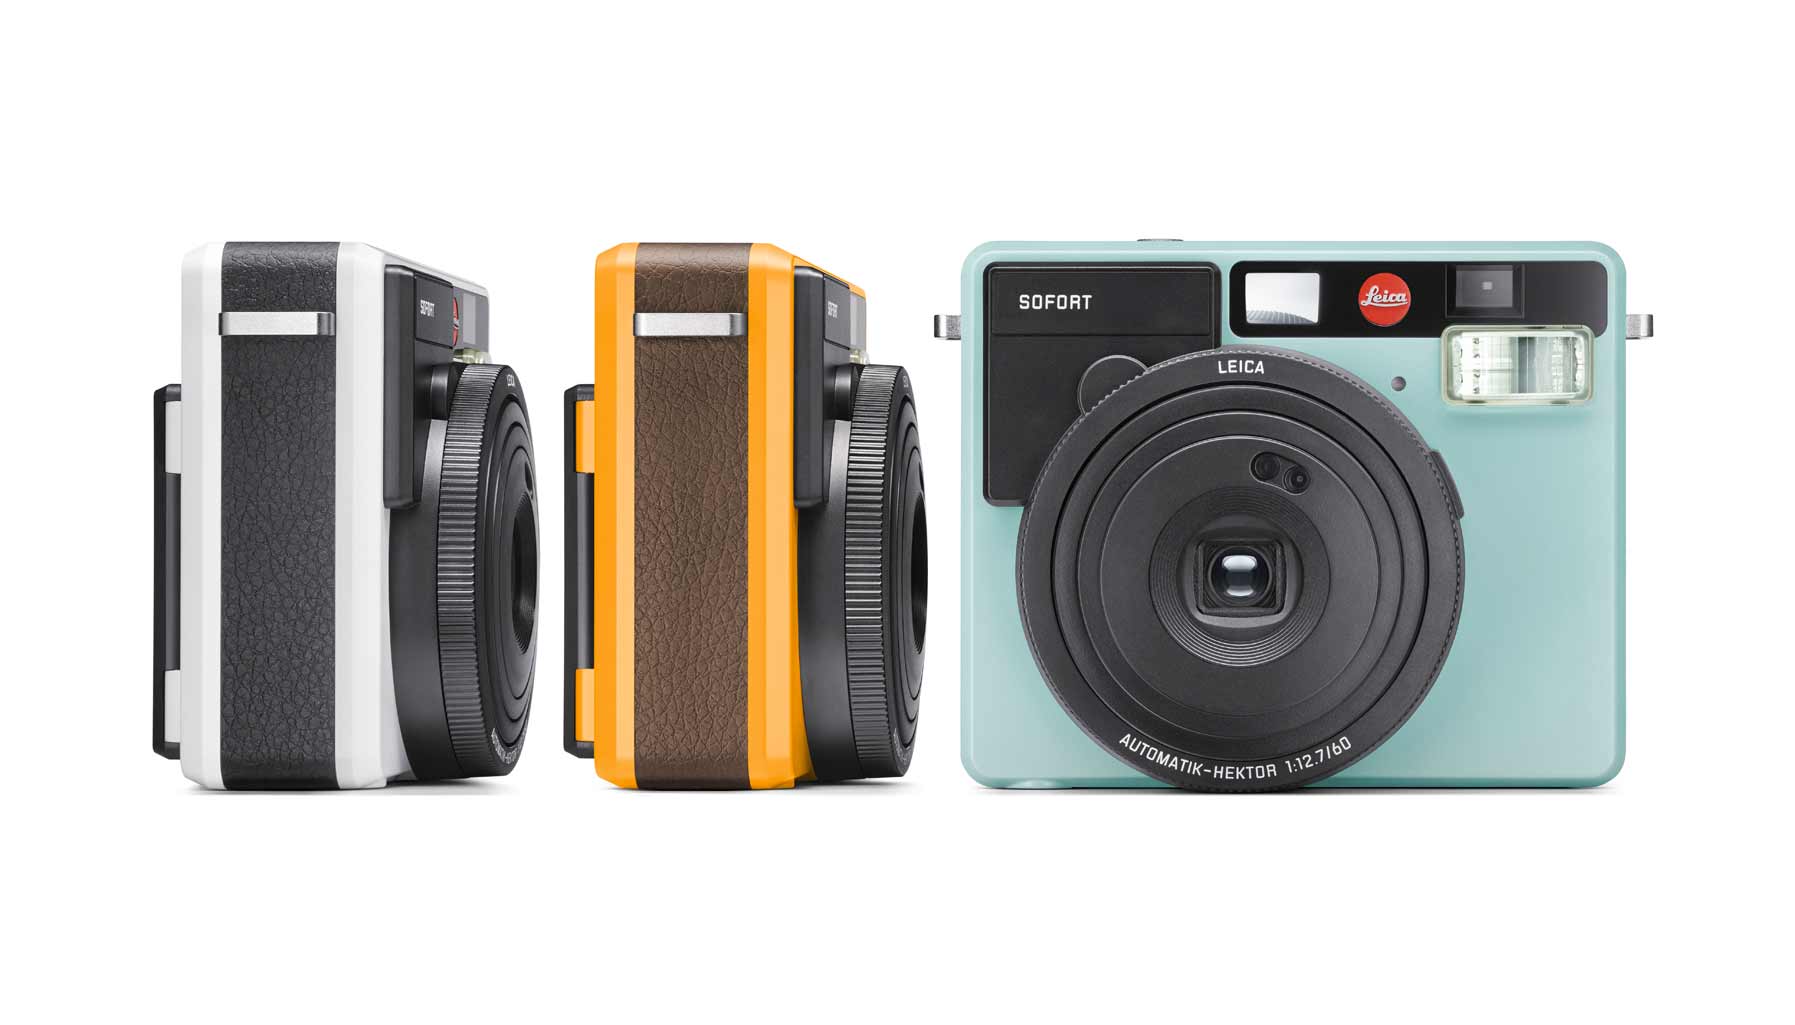 Meet Sofort, Leica’s first instant camera that’s set to capture the market